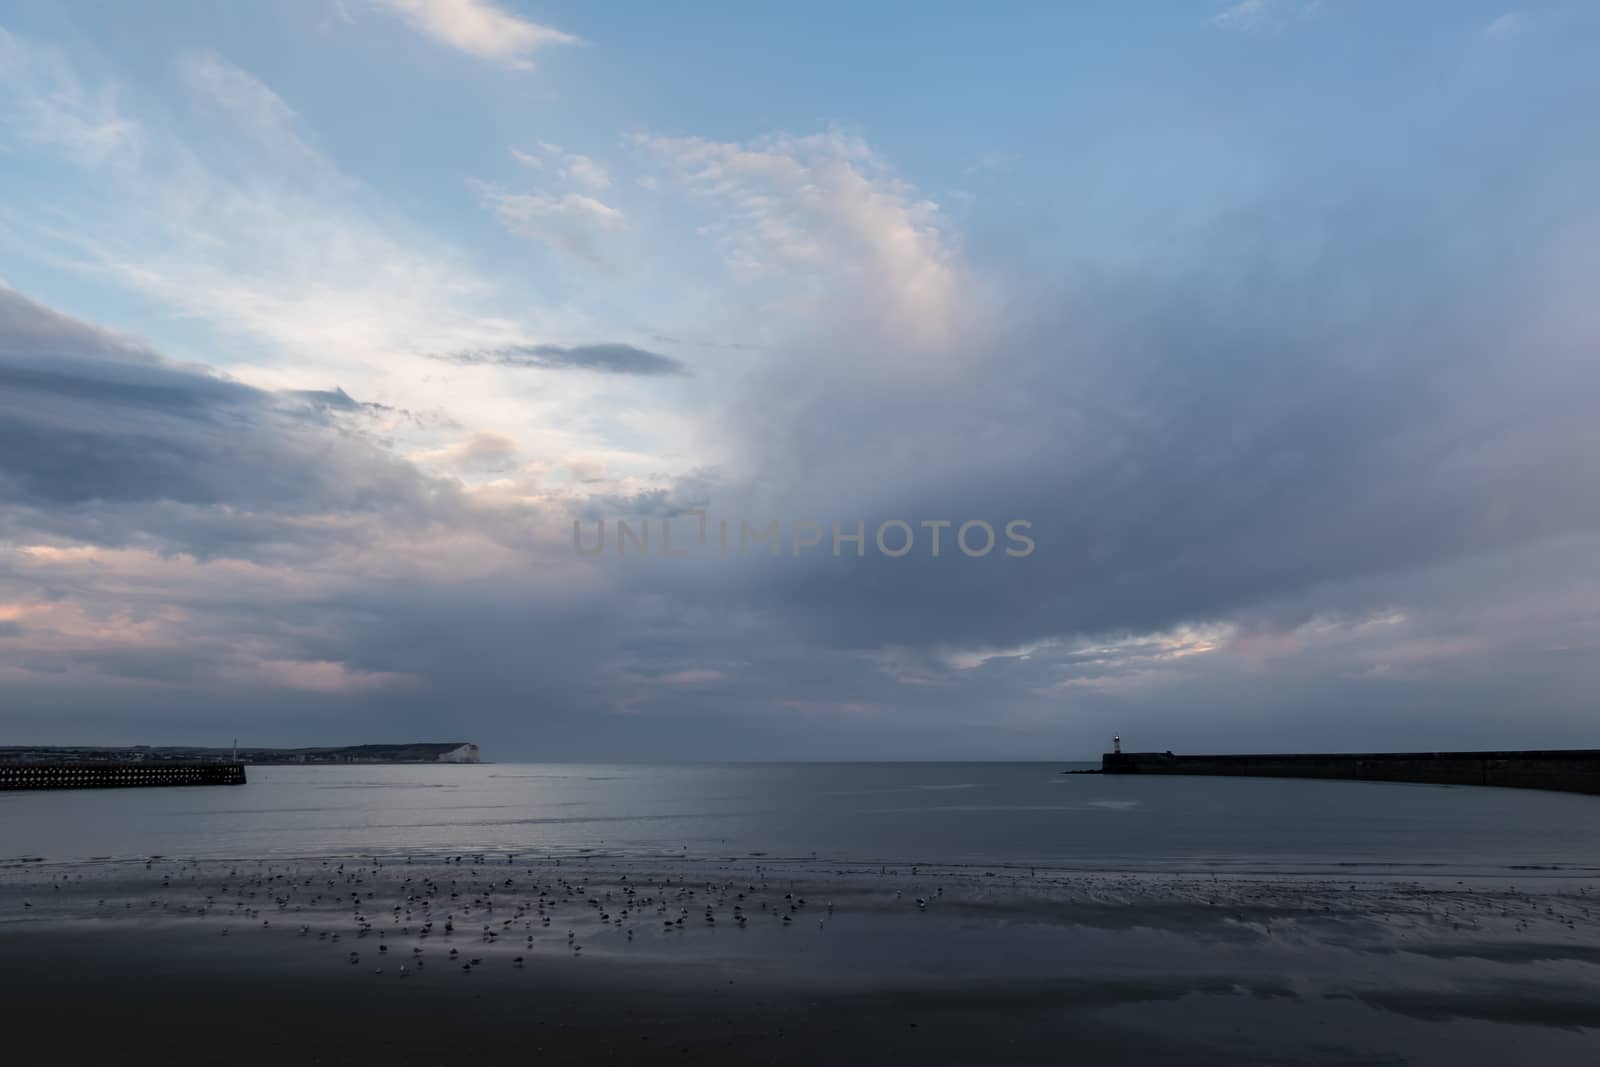 Seaford Head and Newhaven Lighthouse on July evening, with birds on beach at low tide and heavy clouds in blue sky.